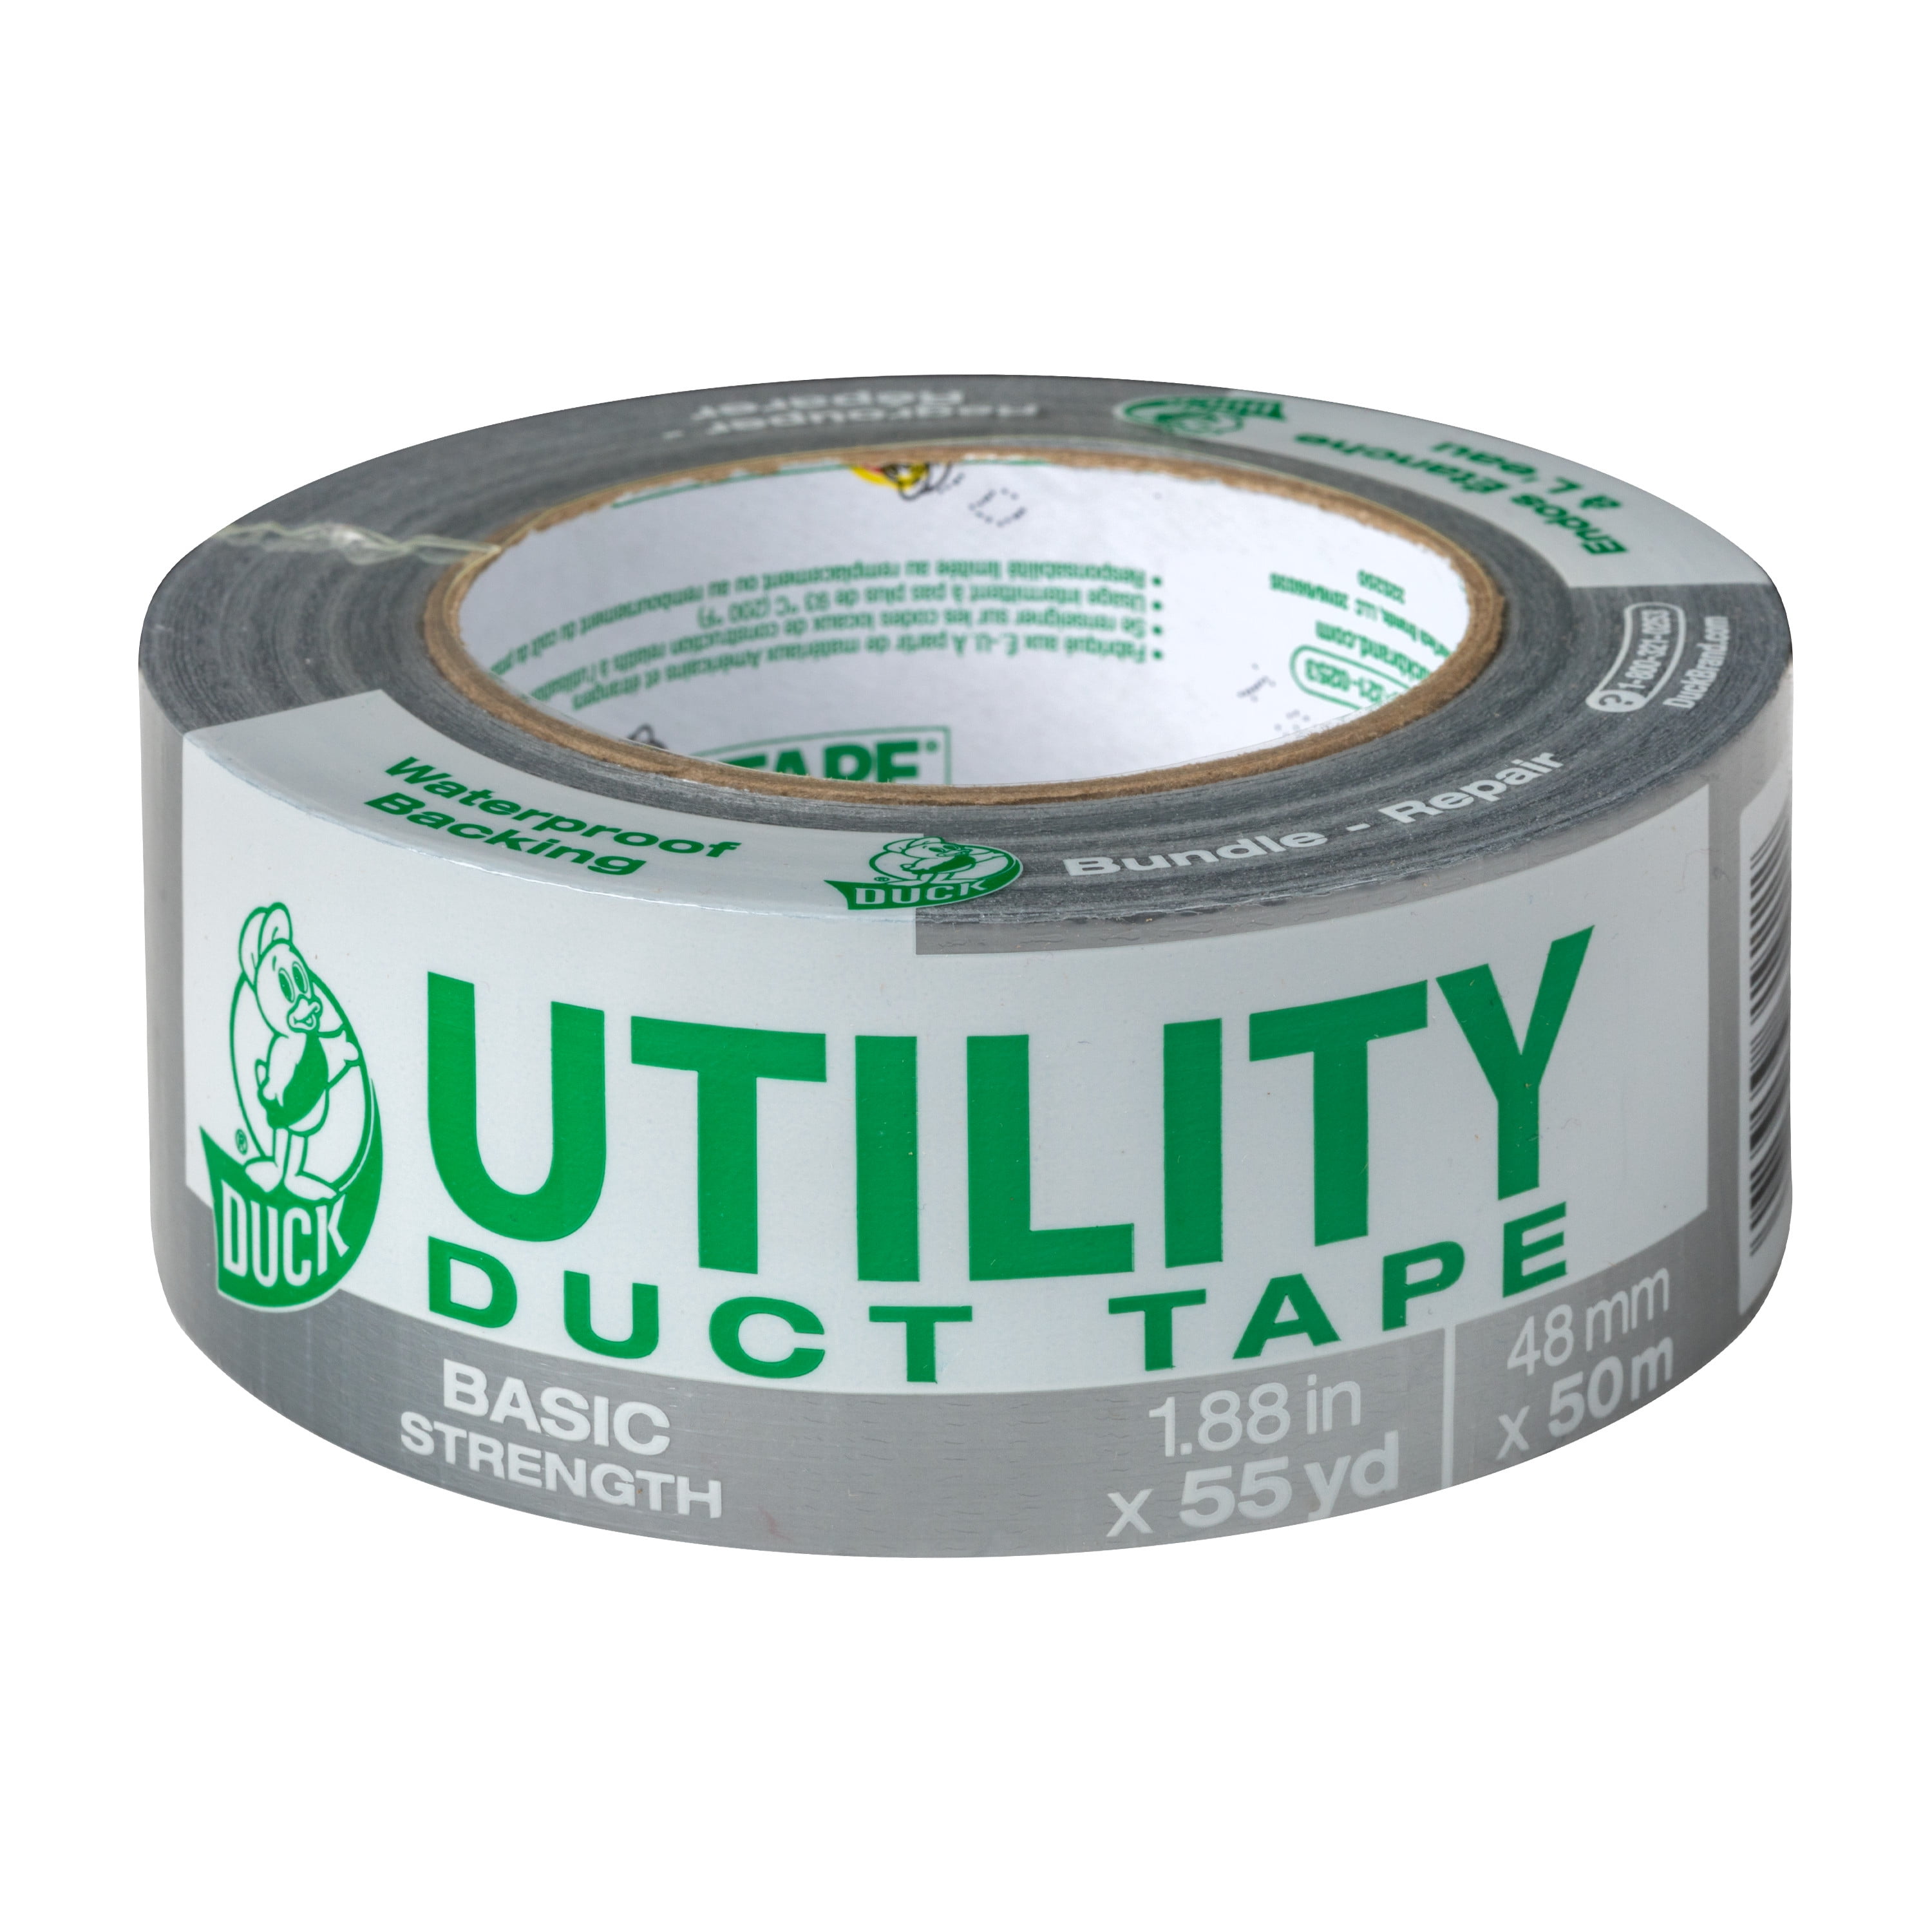 Duck Tape 1.88 In. x 20 Yd. Colored Duct Tape, Yellow - Valu Home Centers